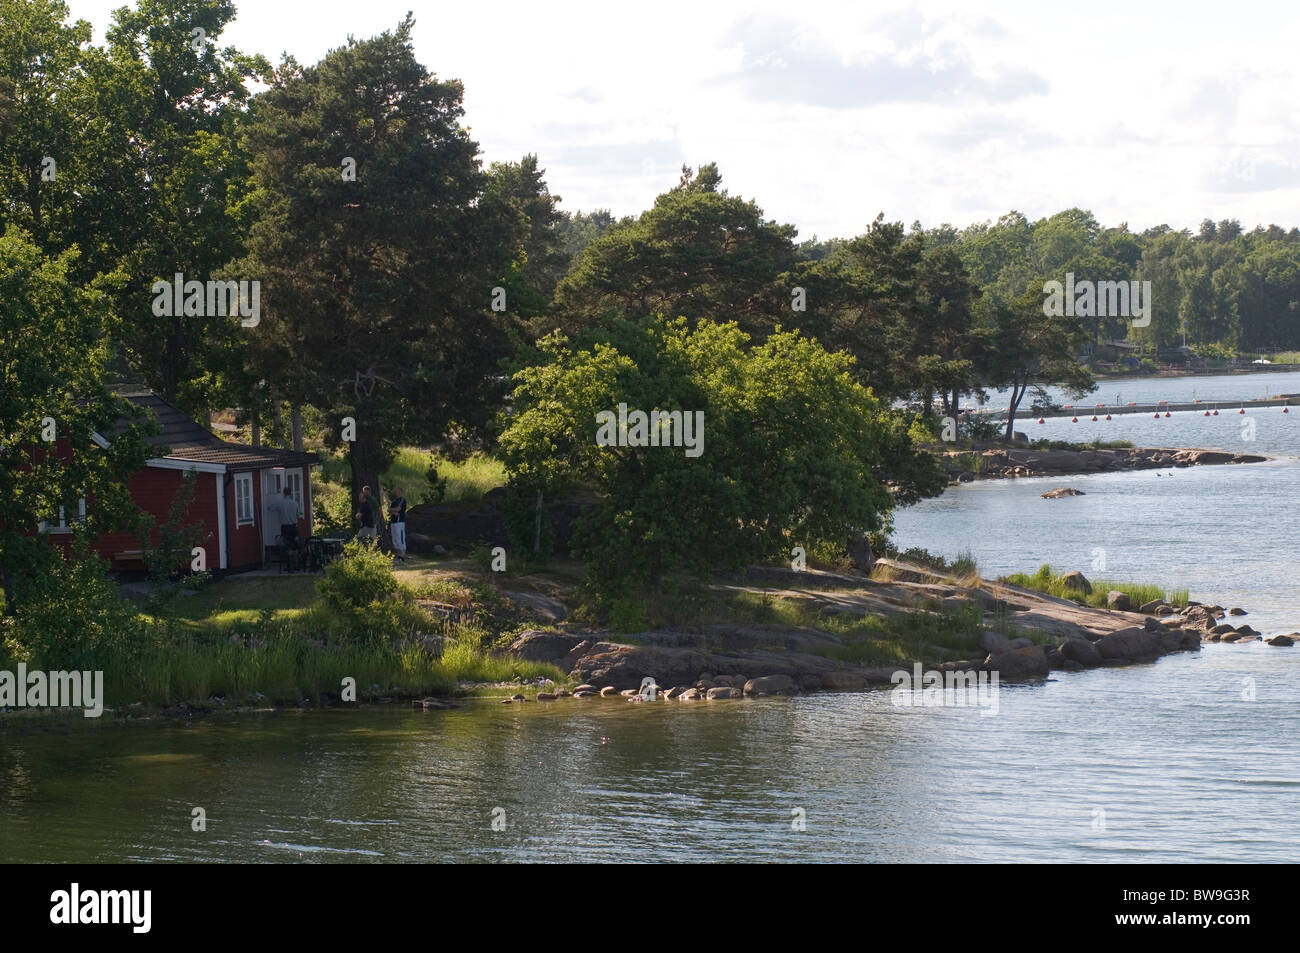 swedish countryside lake water clean countryside sweden boat boats boating rower rowing landscape wilderness unspoilt remote qui Stock Photo